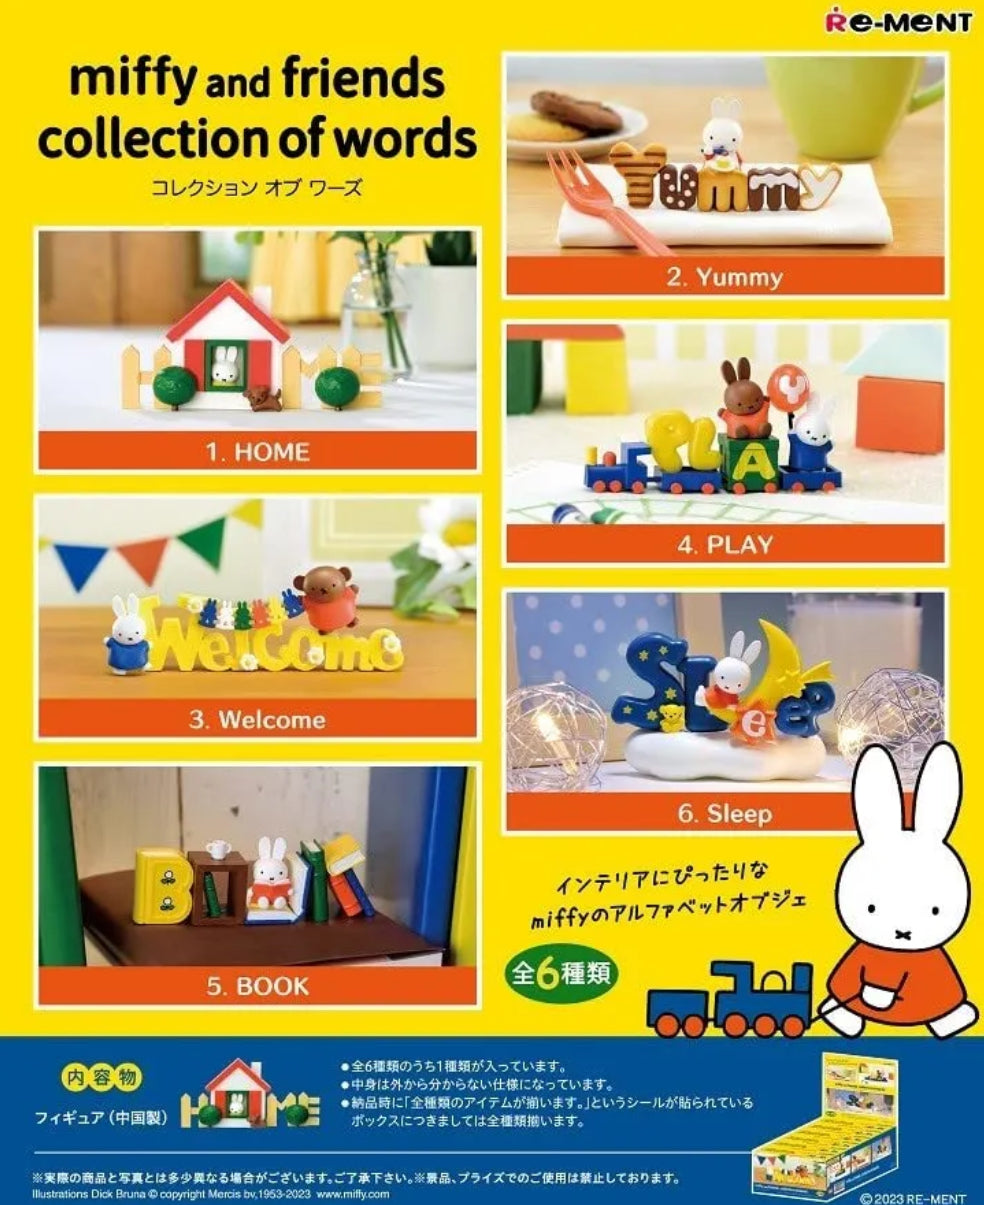 Re-Ment Miffy miffy and friends collection of words